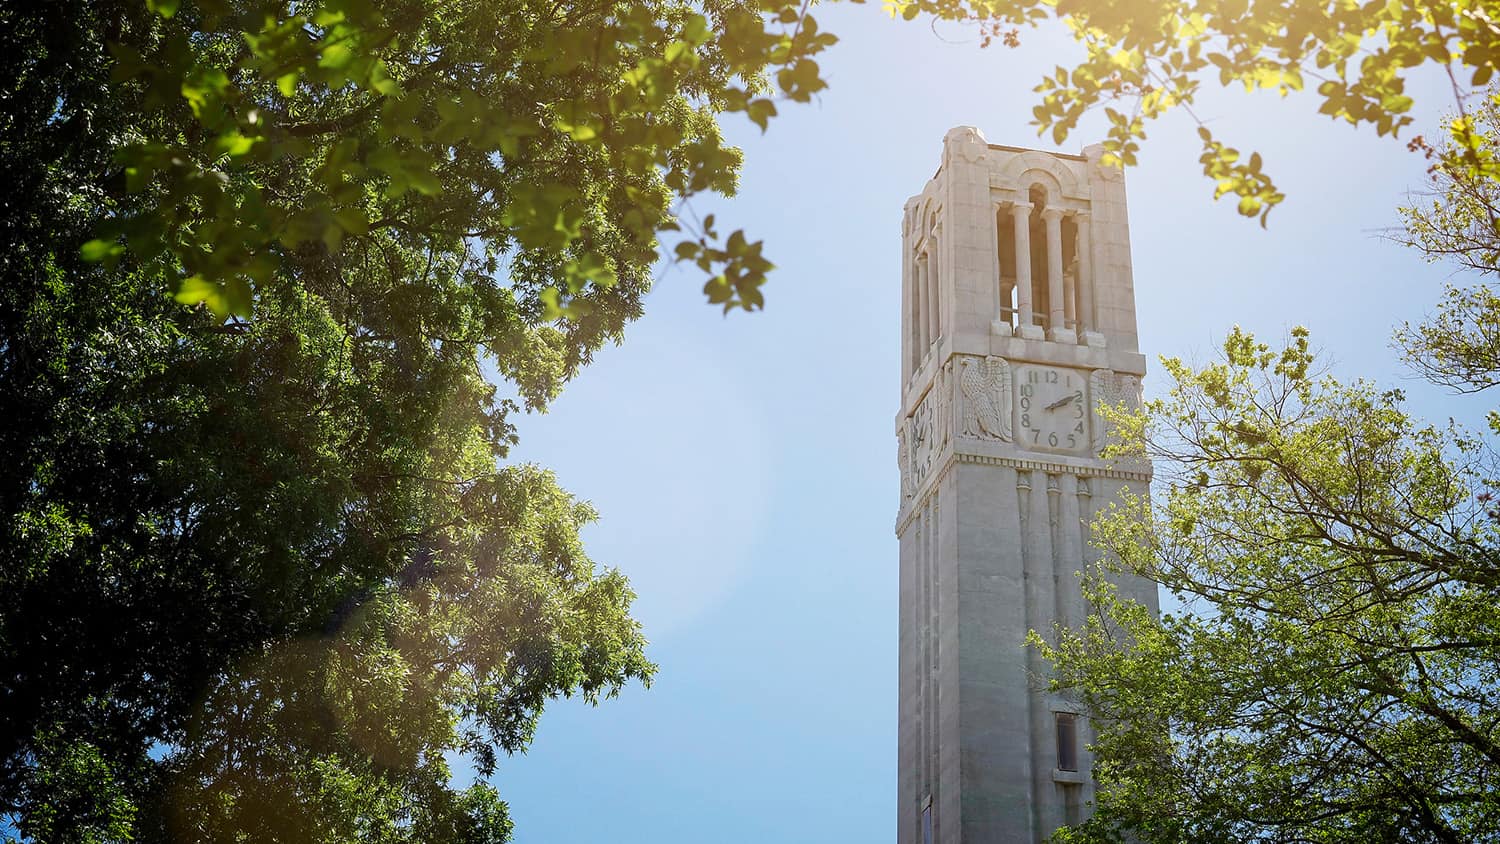 The NC State belltower shines as a beacon of hope over the campus of NC State.